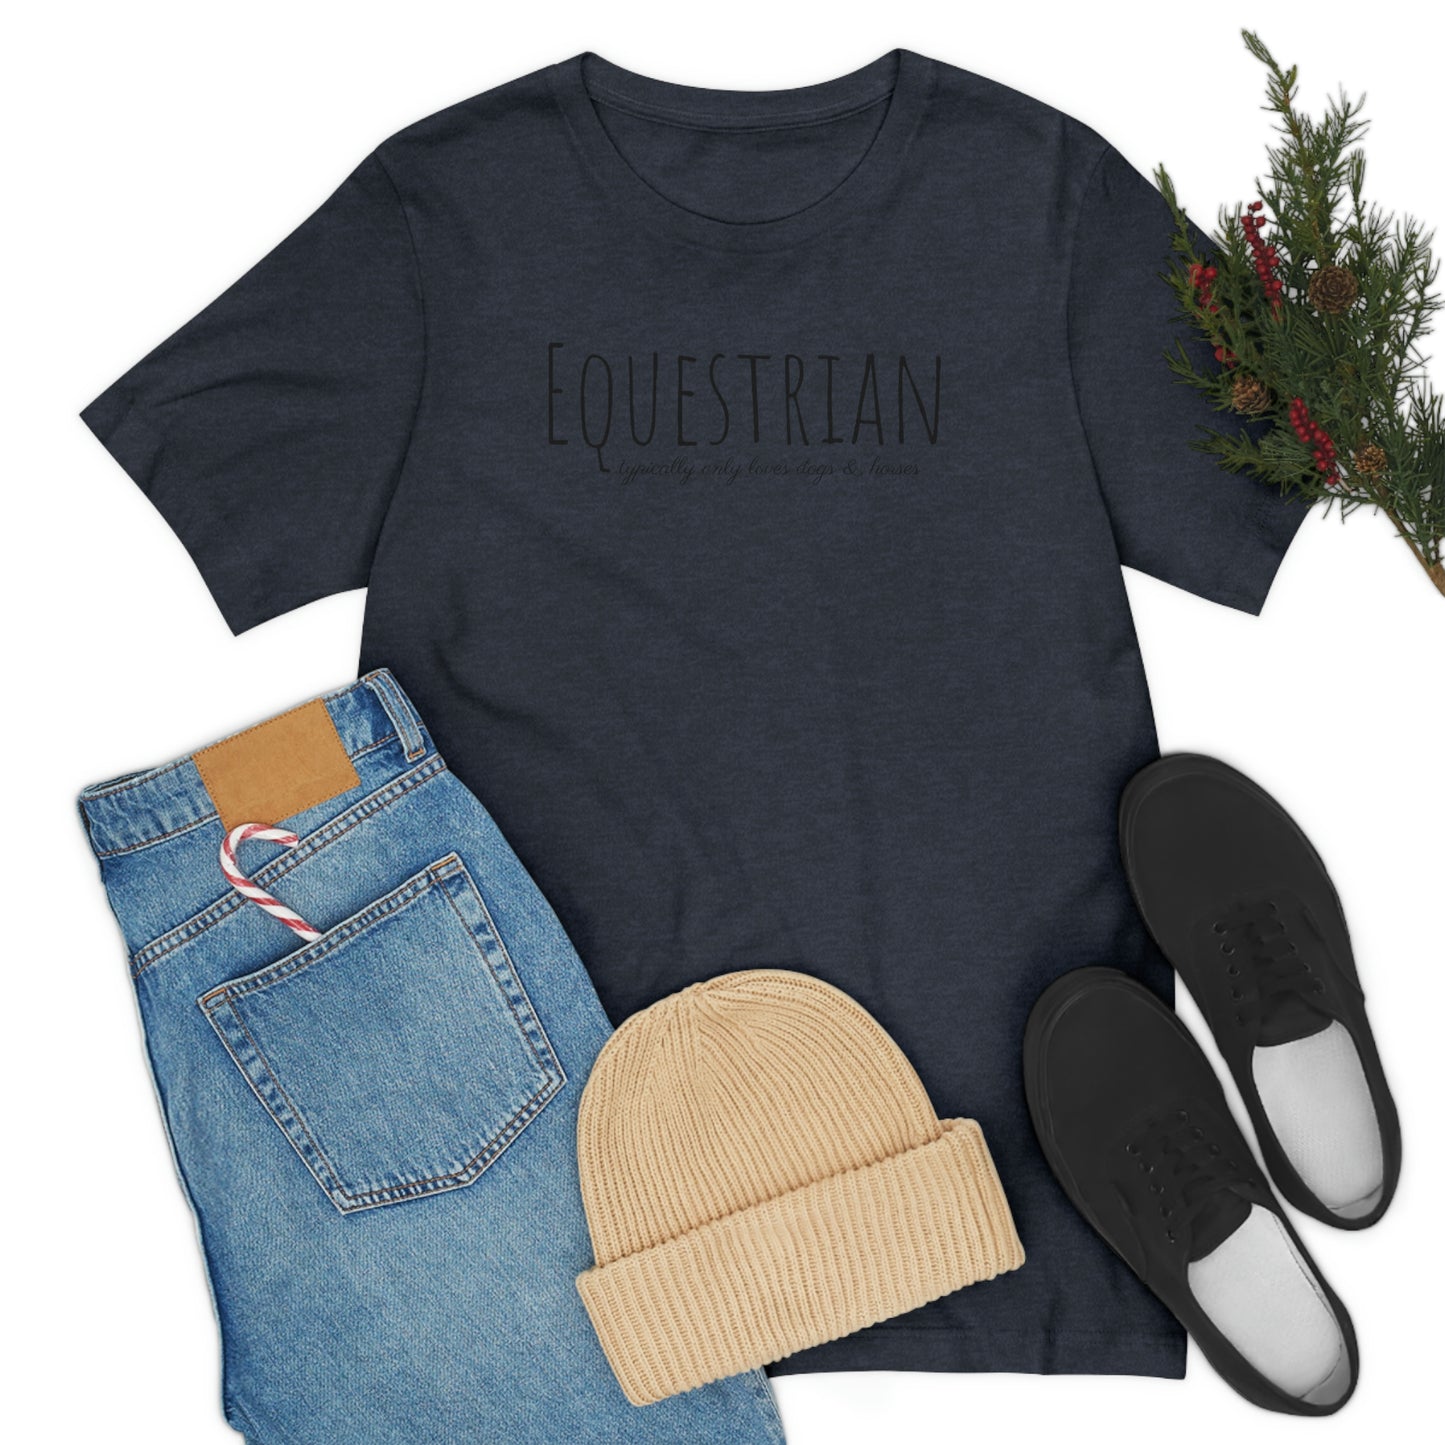 Shirt - Equestrian, typically only loves dogs & horses